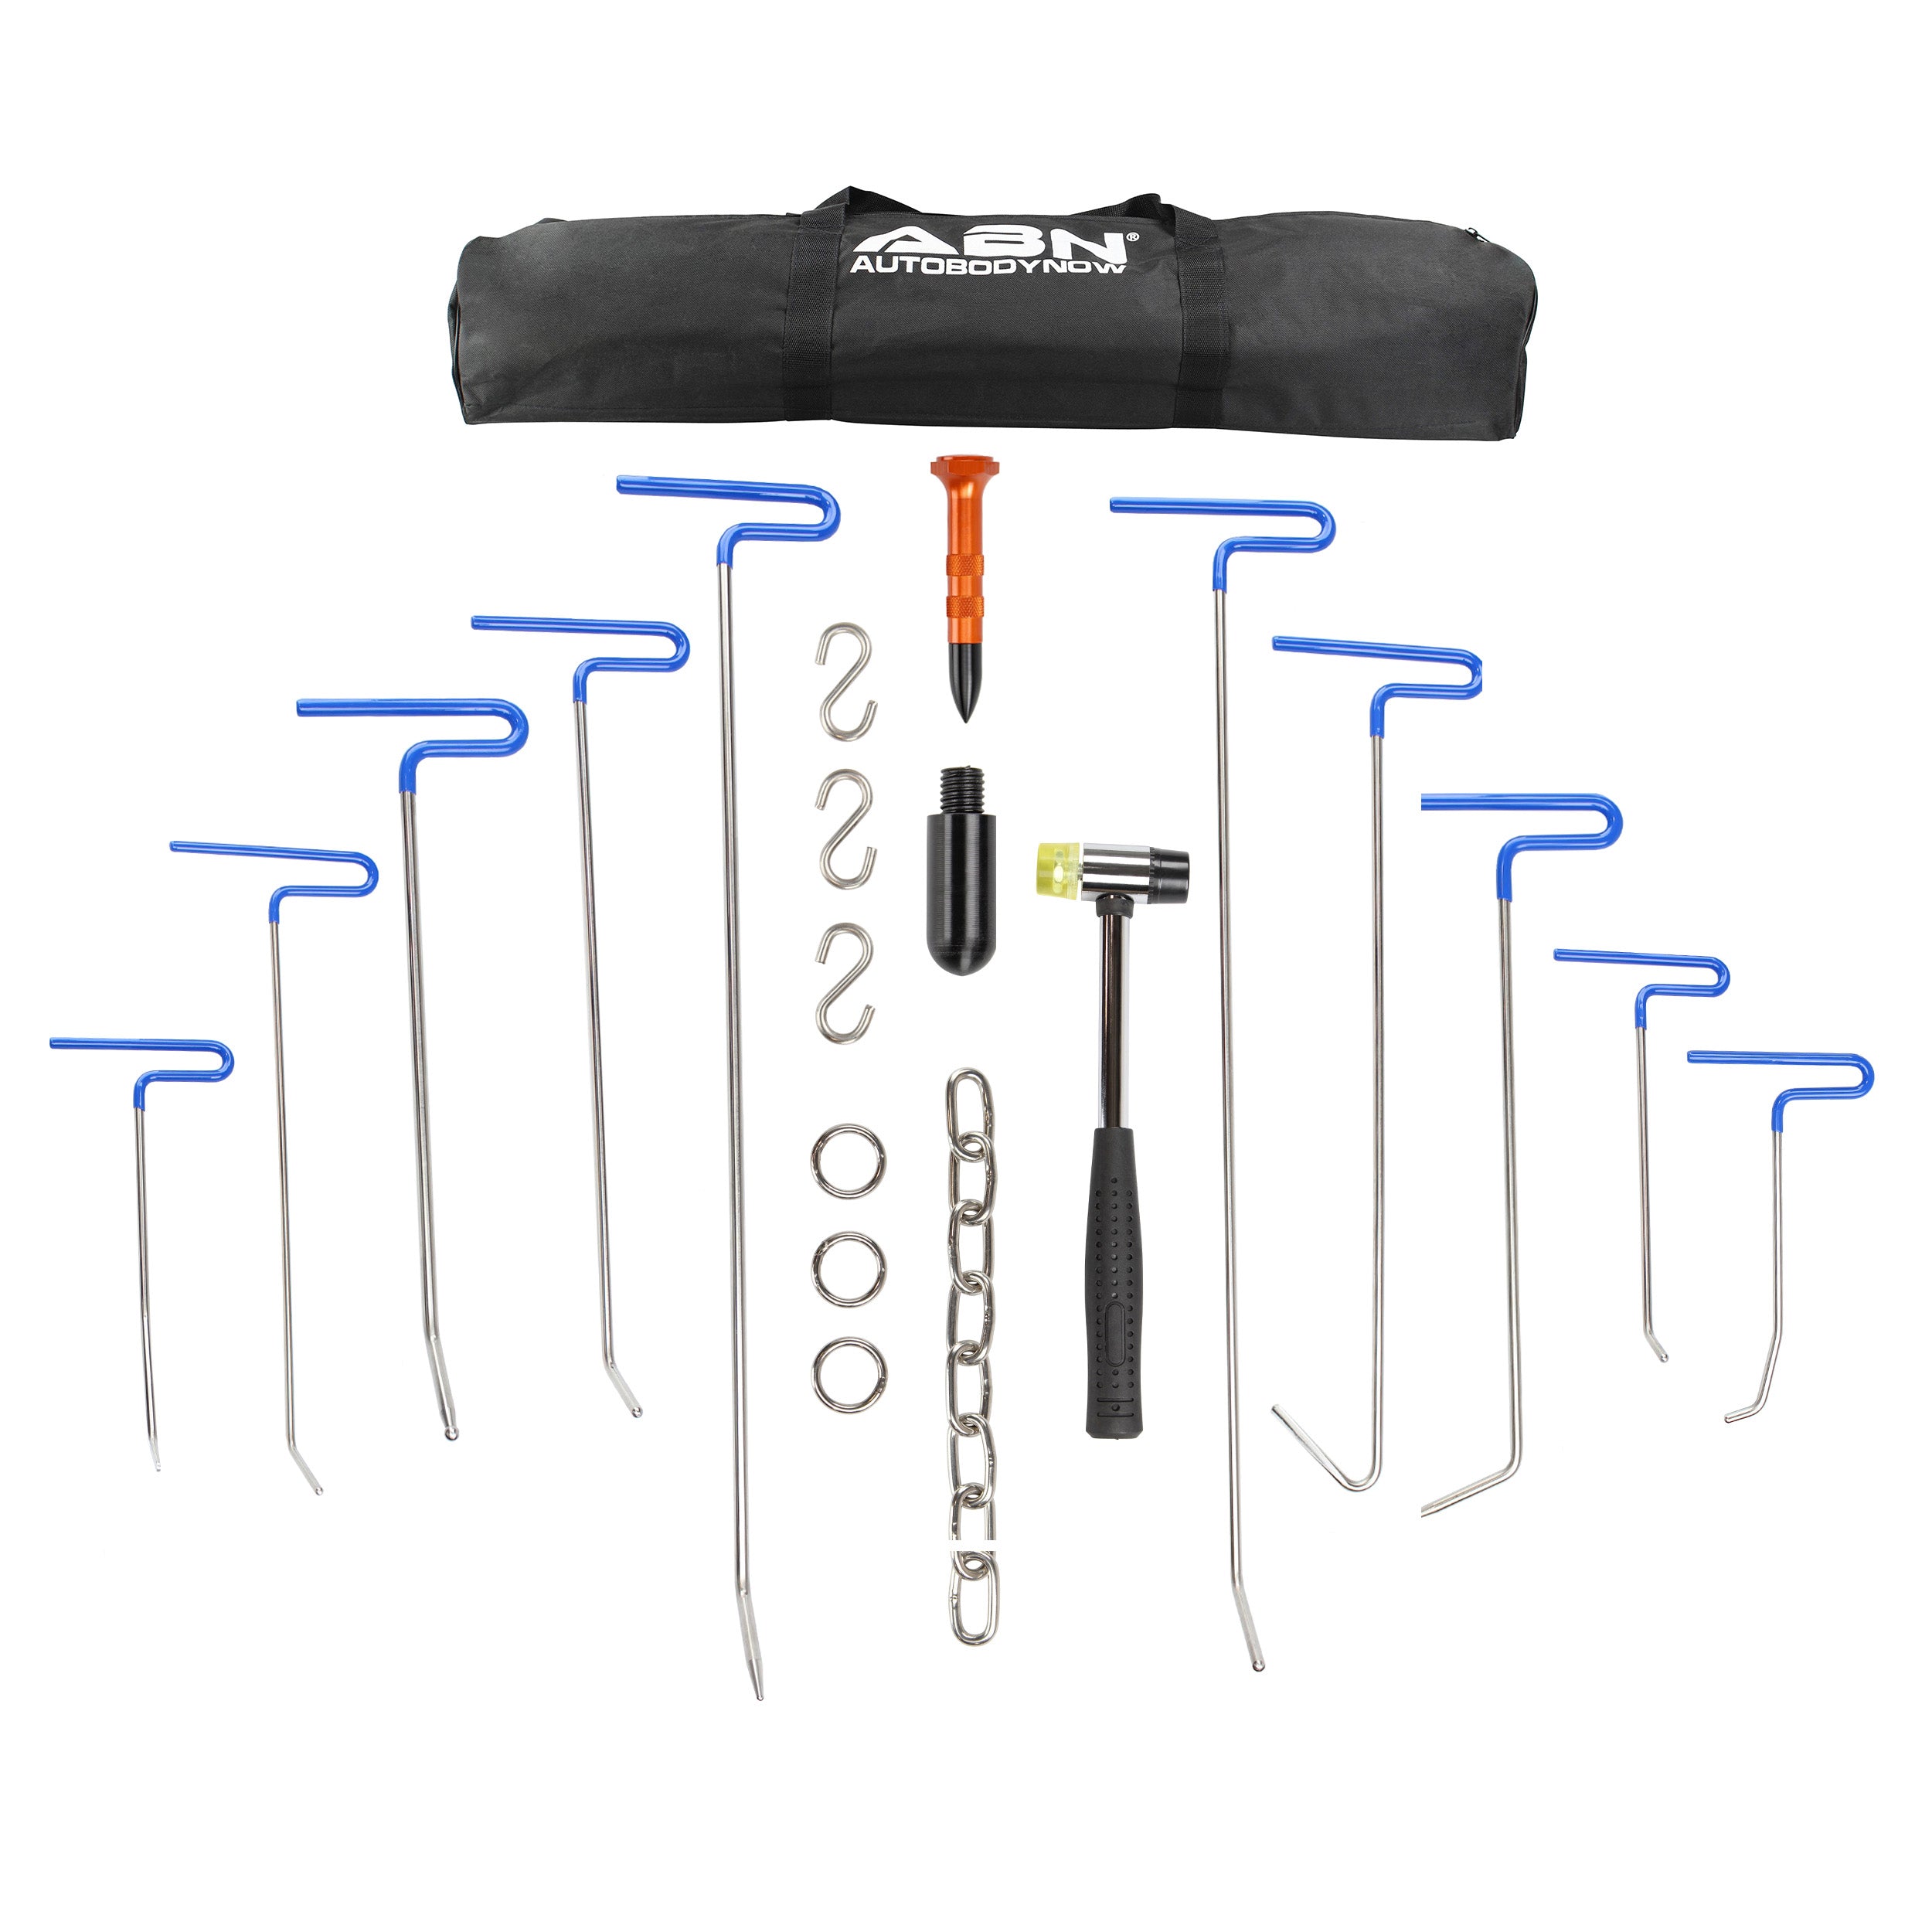 Paintless Dent Repair Rods with Tips - 20pc Repair Dent Removal Tools